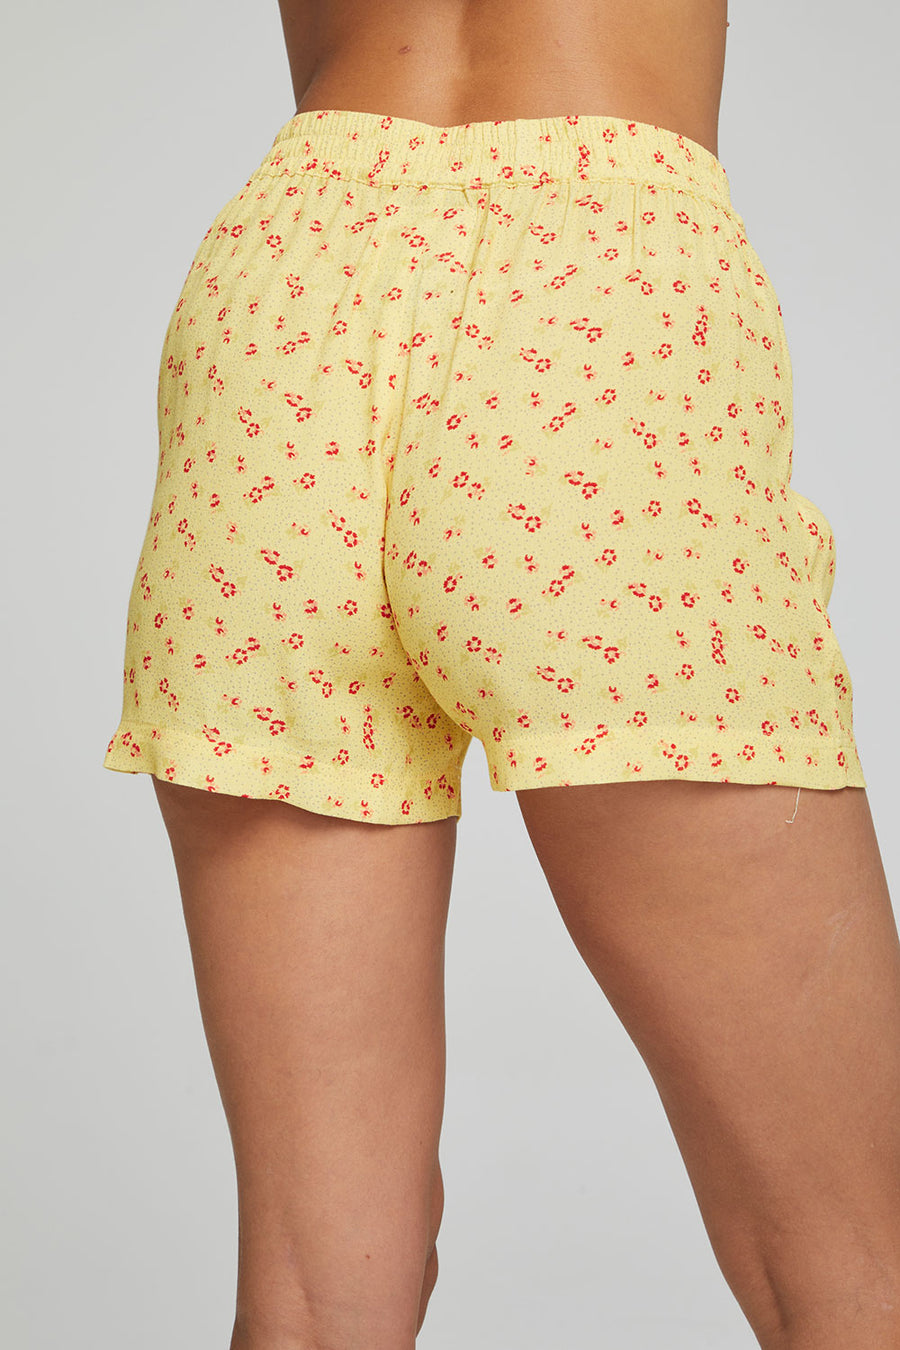 Ollie Boxer Shorts - Anise Flower Print WOMENS chaserbrand